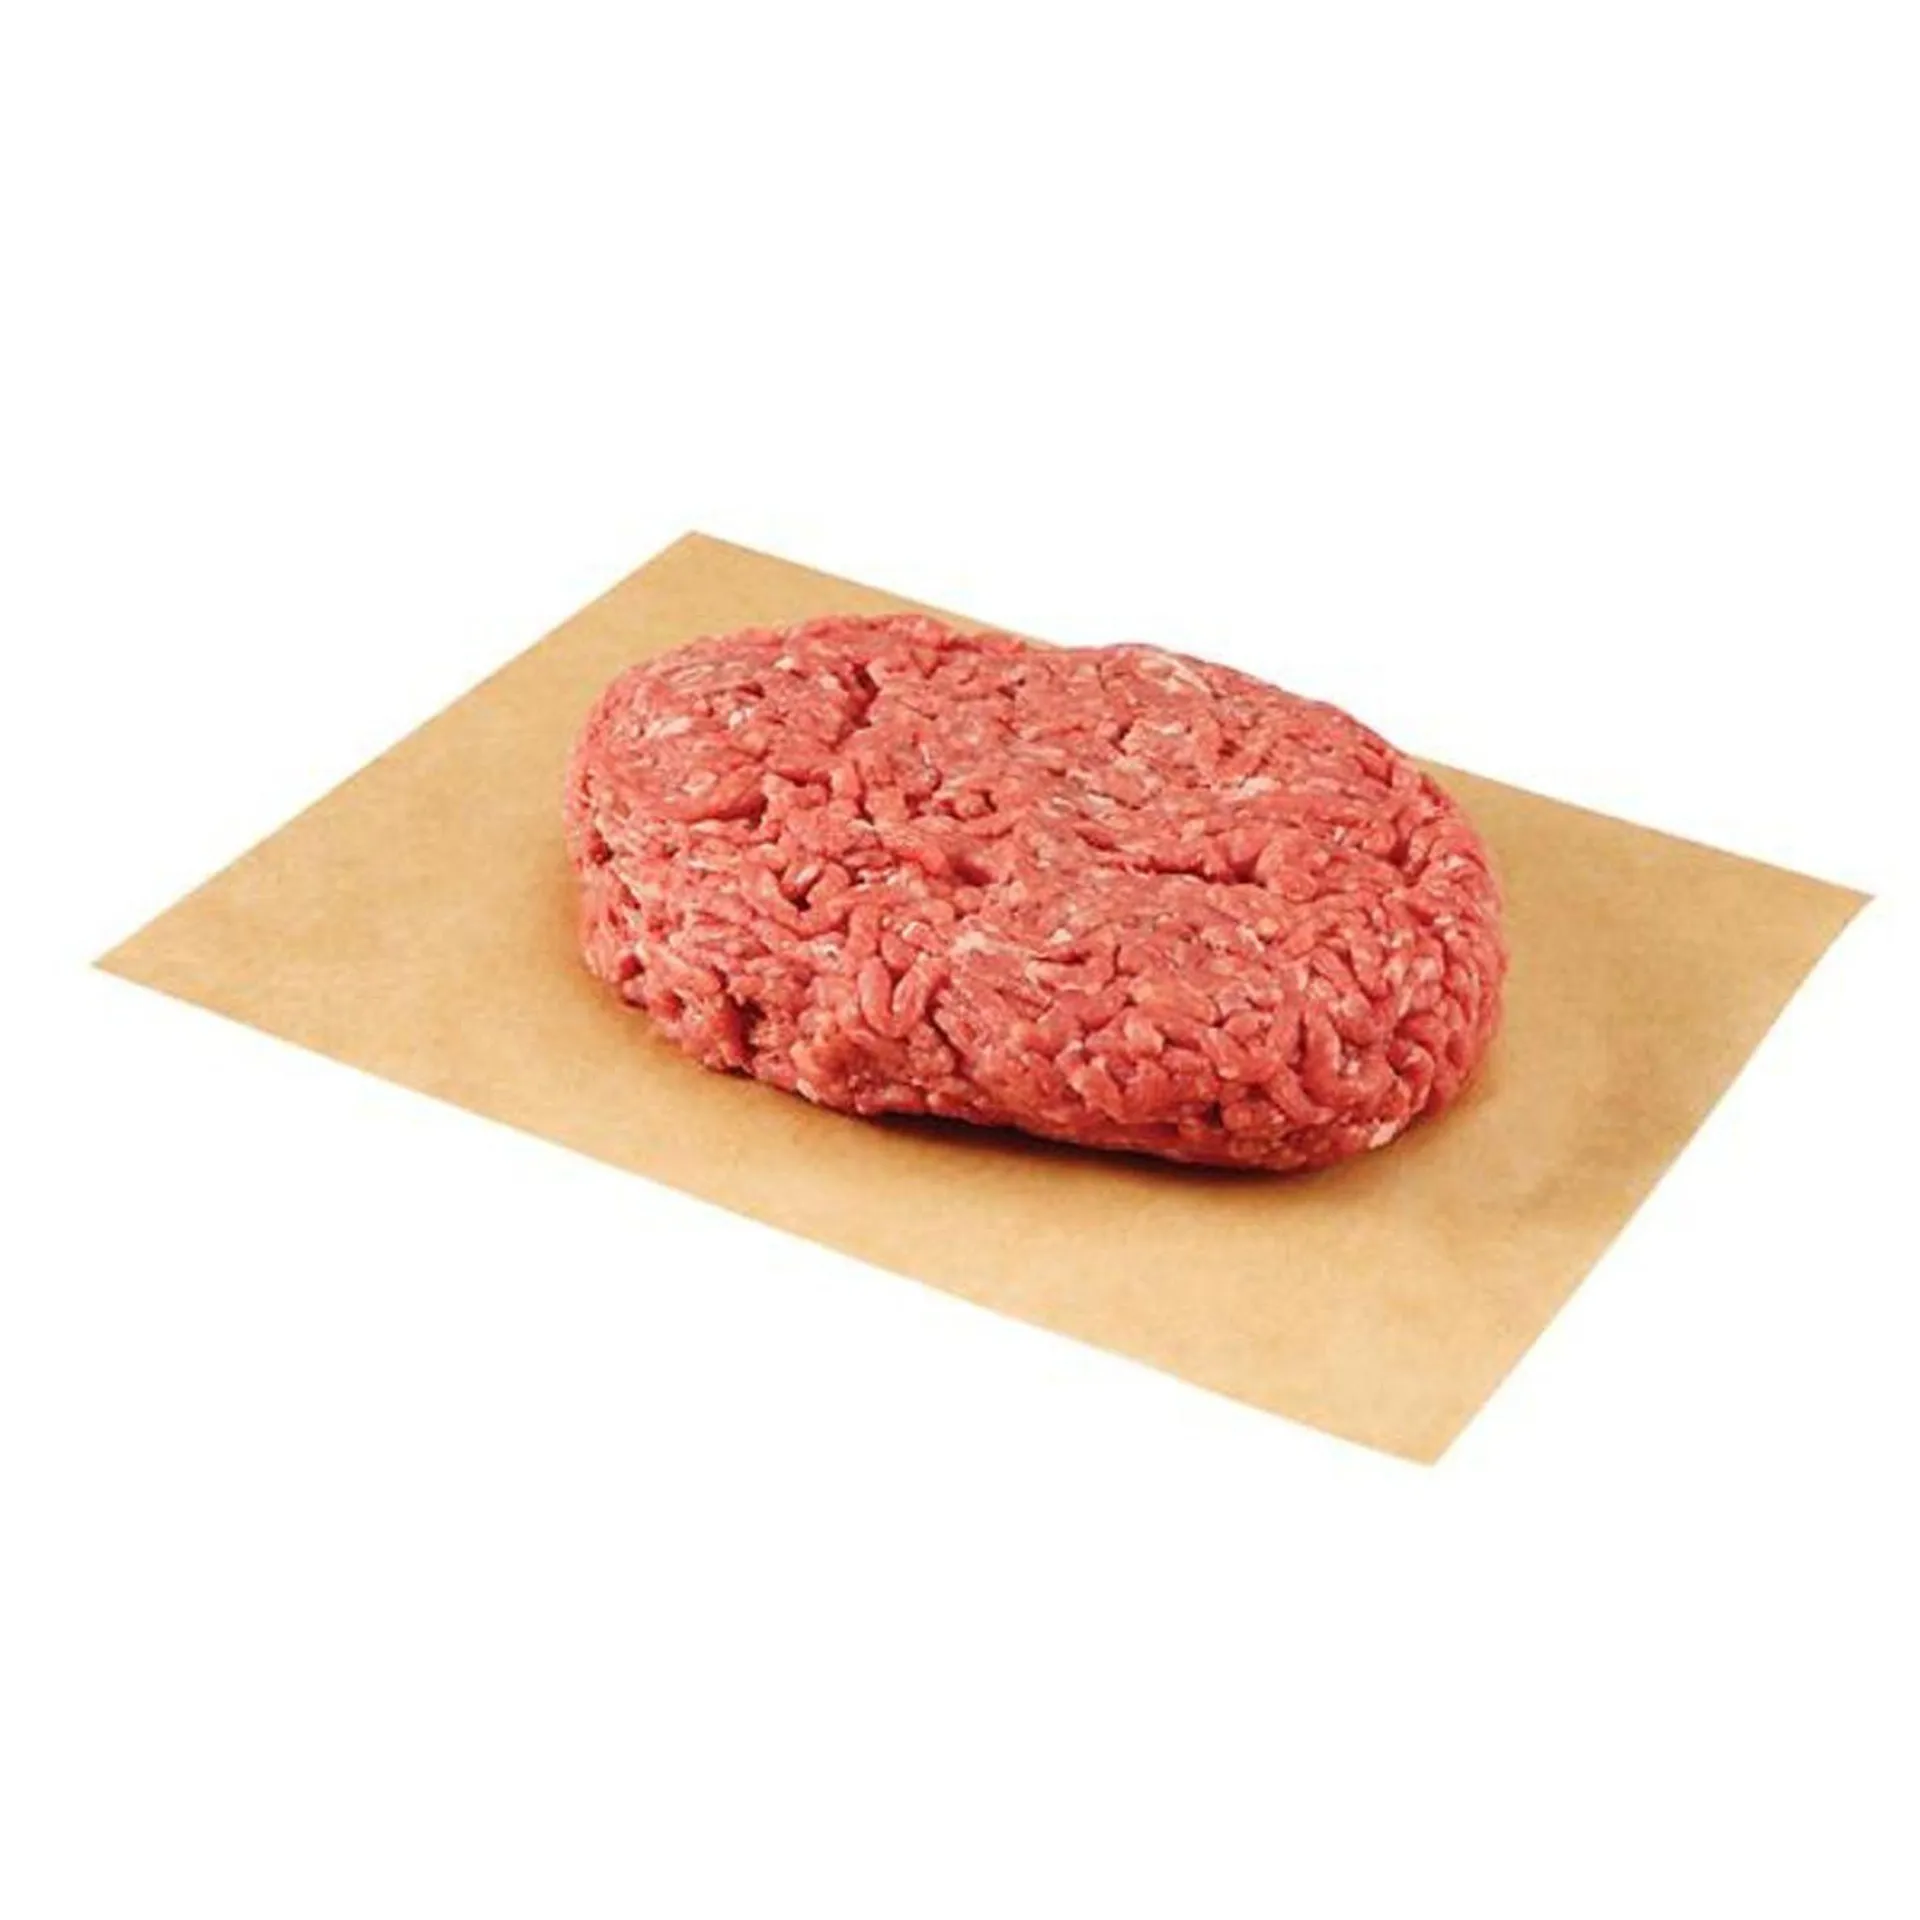 Raley's Purely Made Natural Ground Beef 91% Lean, No Antibiotics Ever